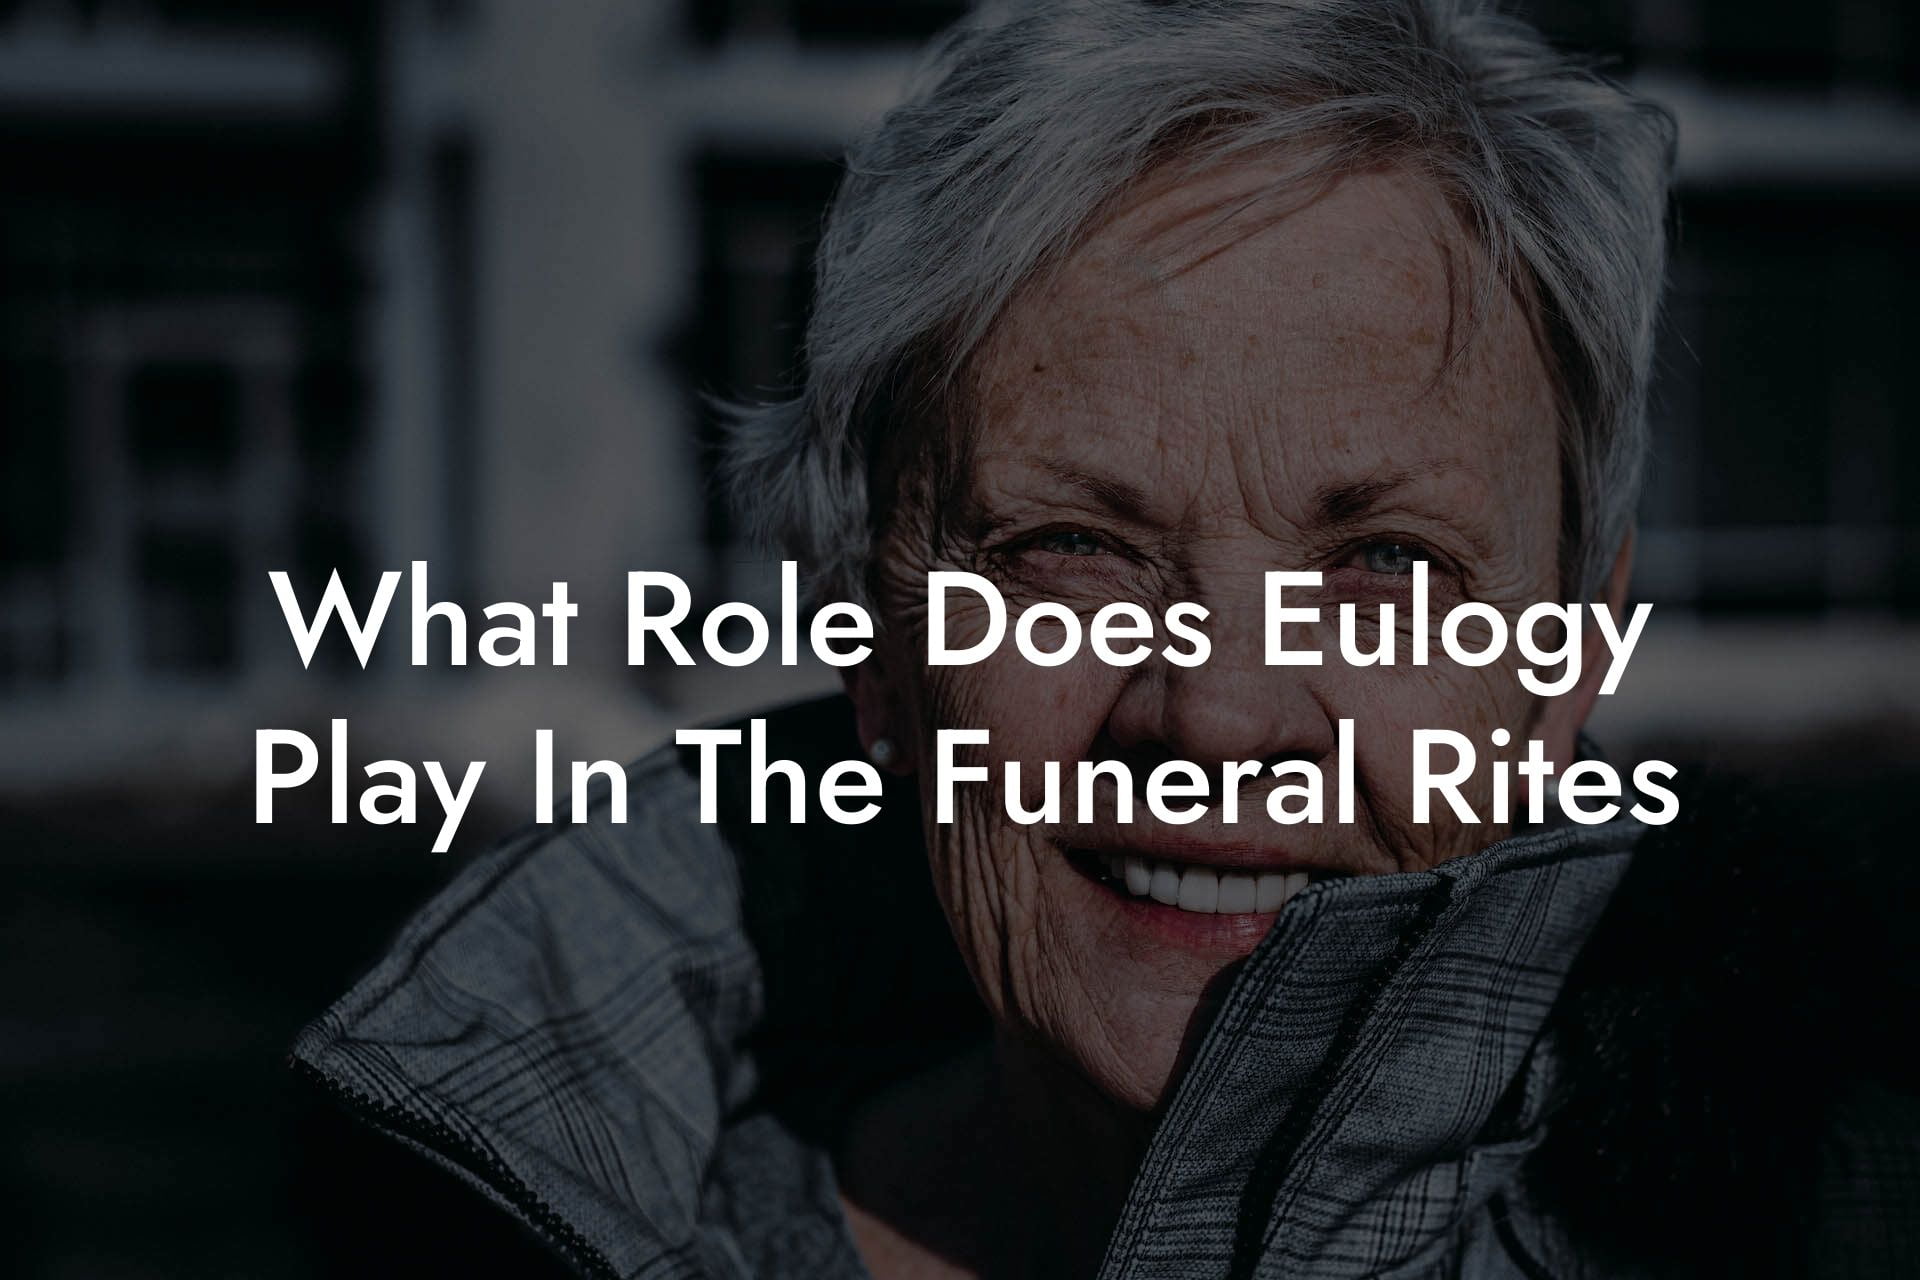 What Role Does Eulogy Play In The Funeral Rites